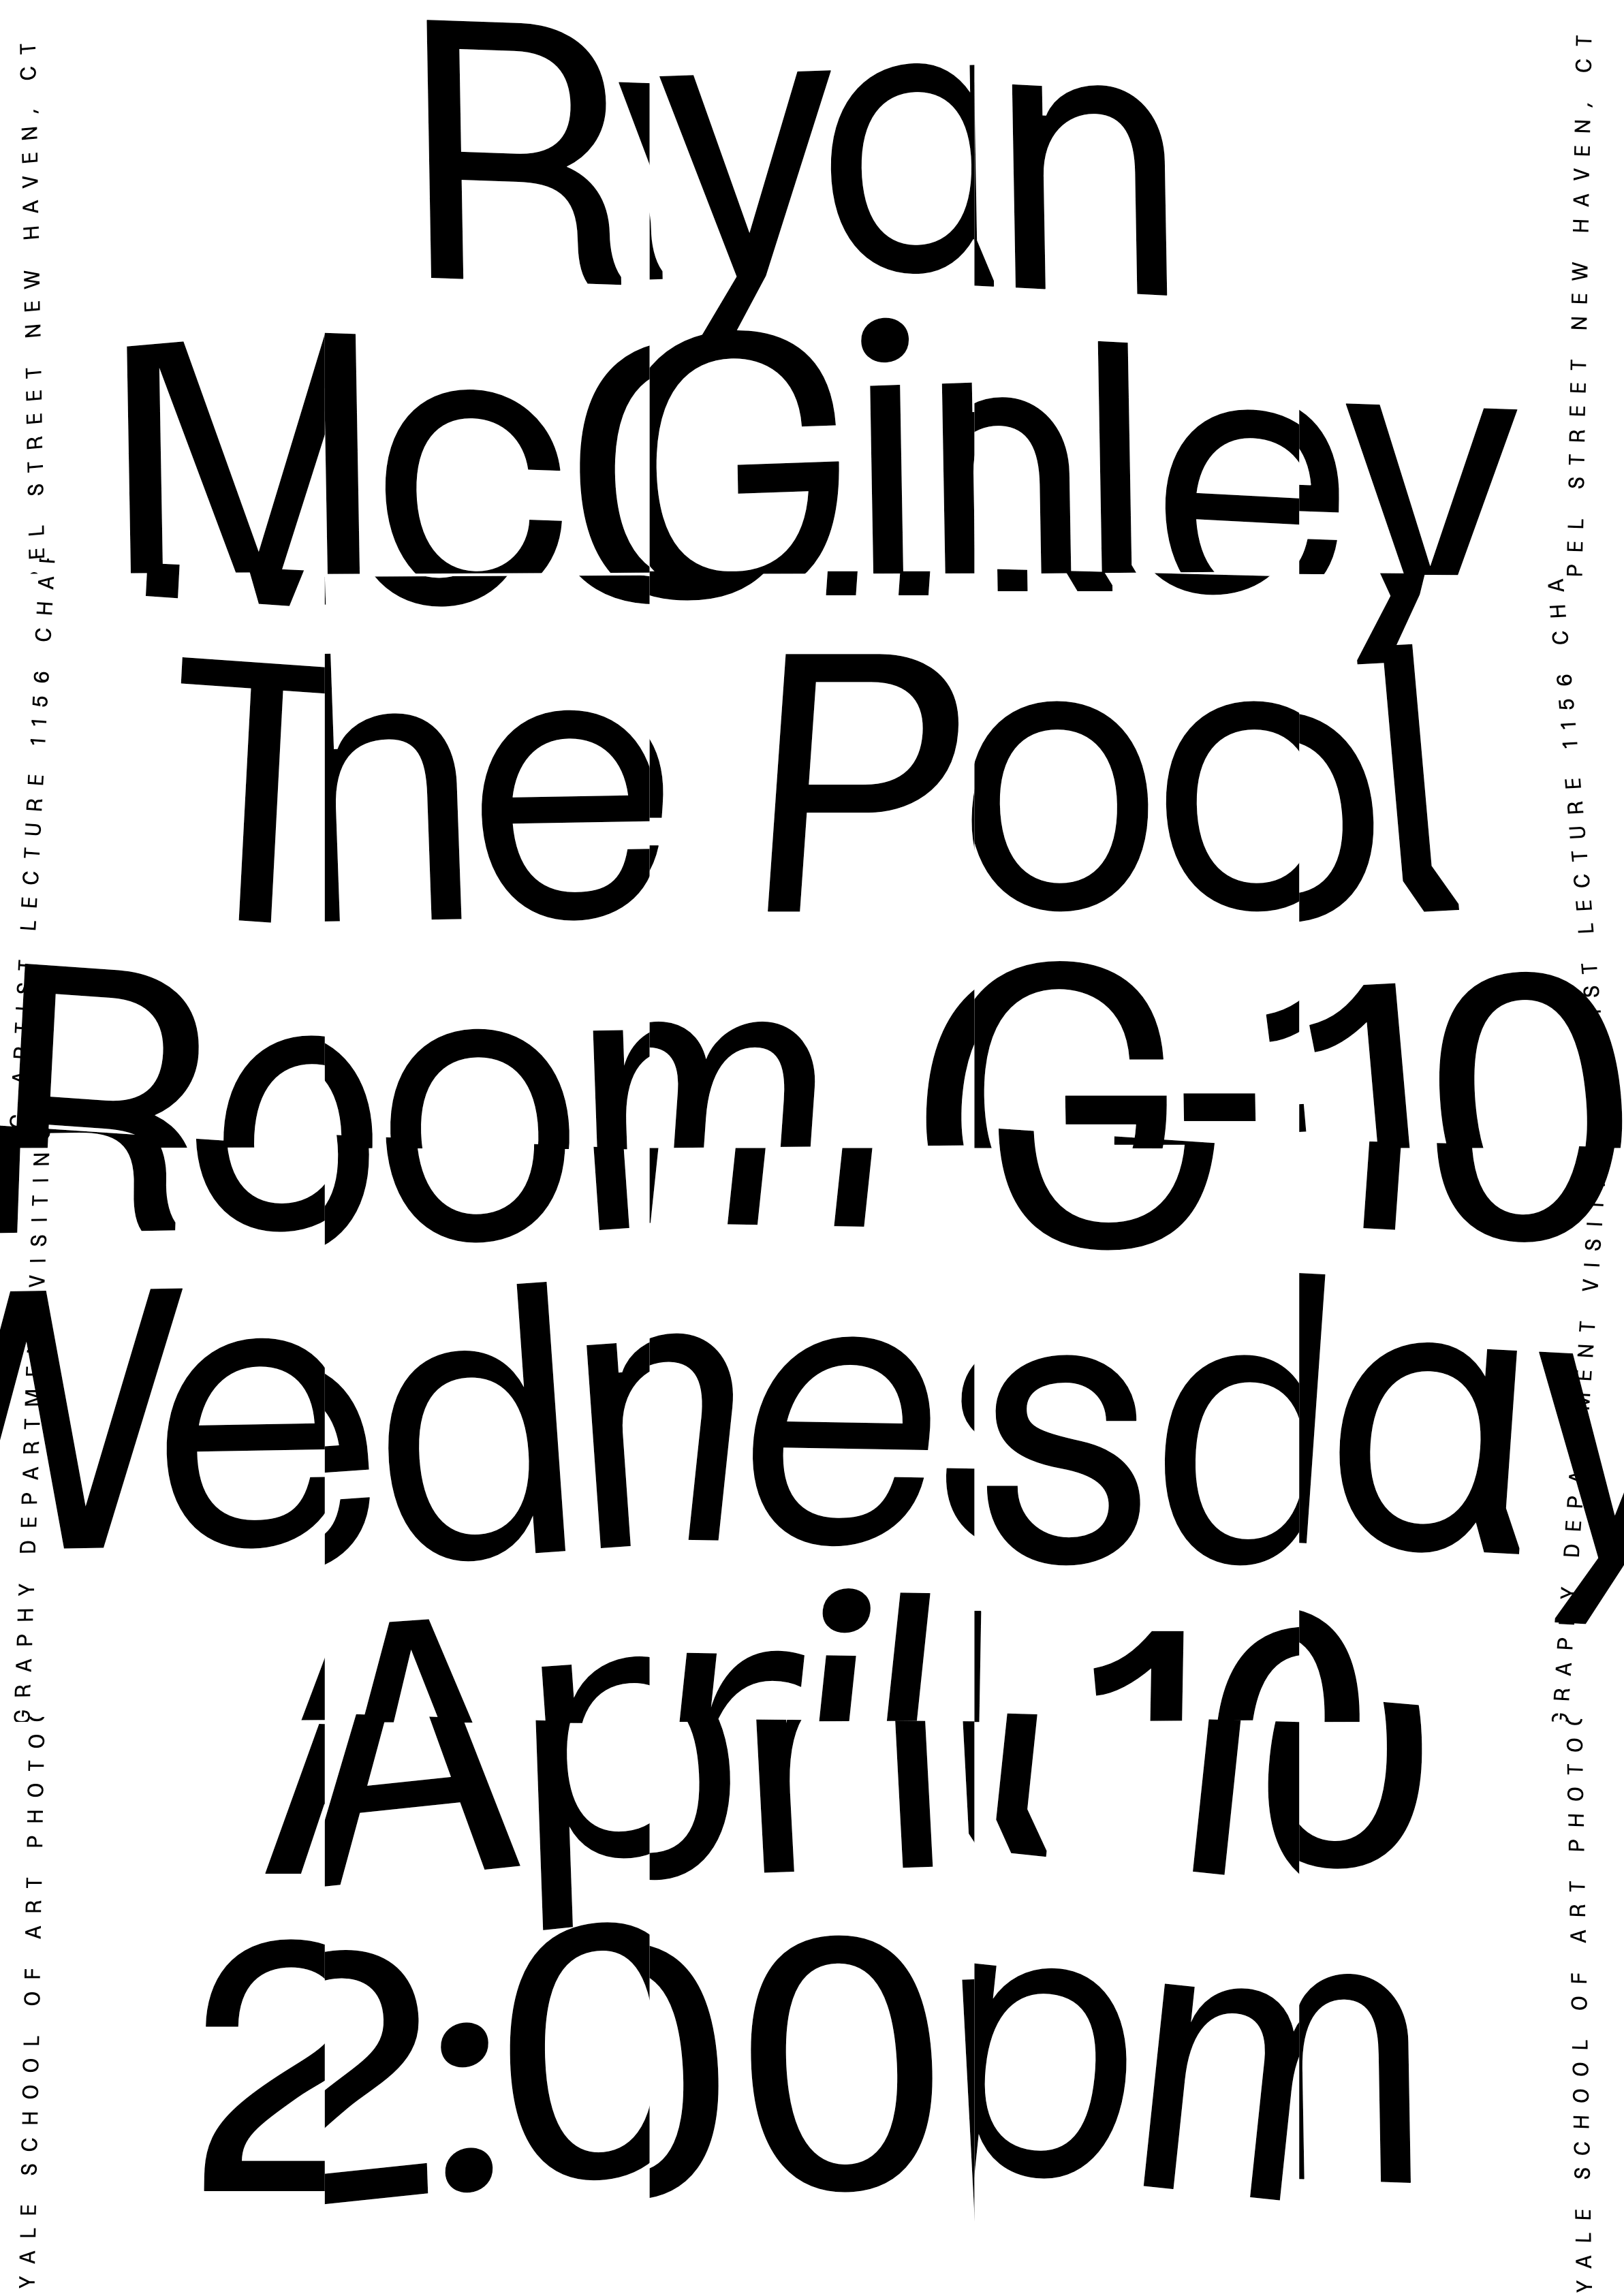 Animated McGinley Poster